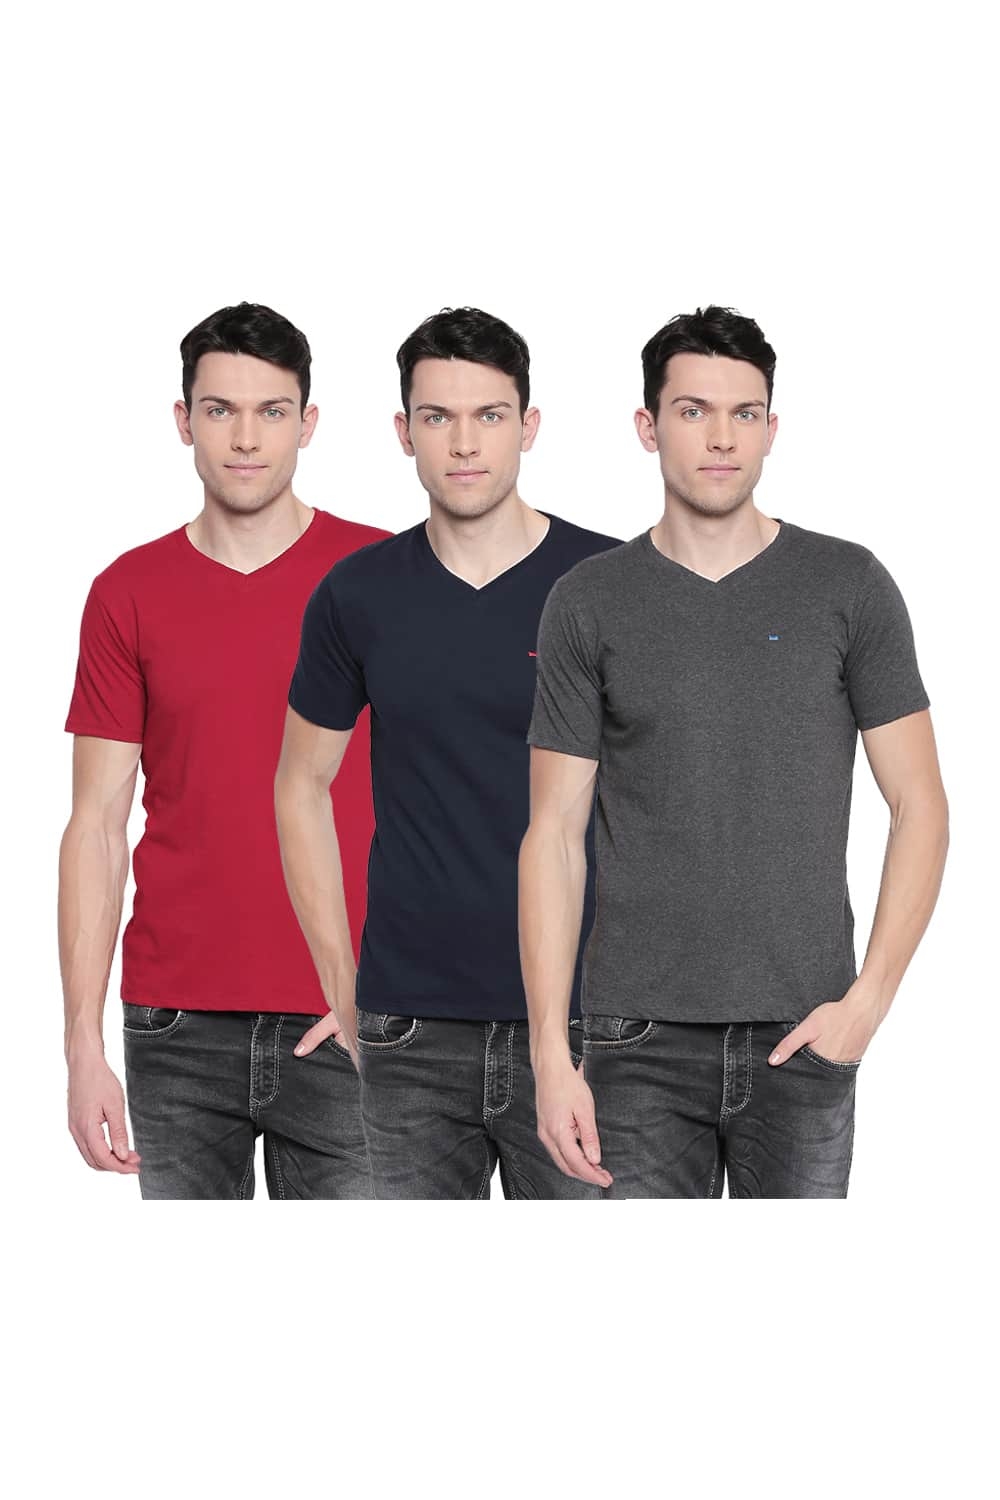 Basics | Basics Value Pack of 3 Muscle Fit V-Neck T-Shirts-19BCTS44912